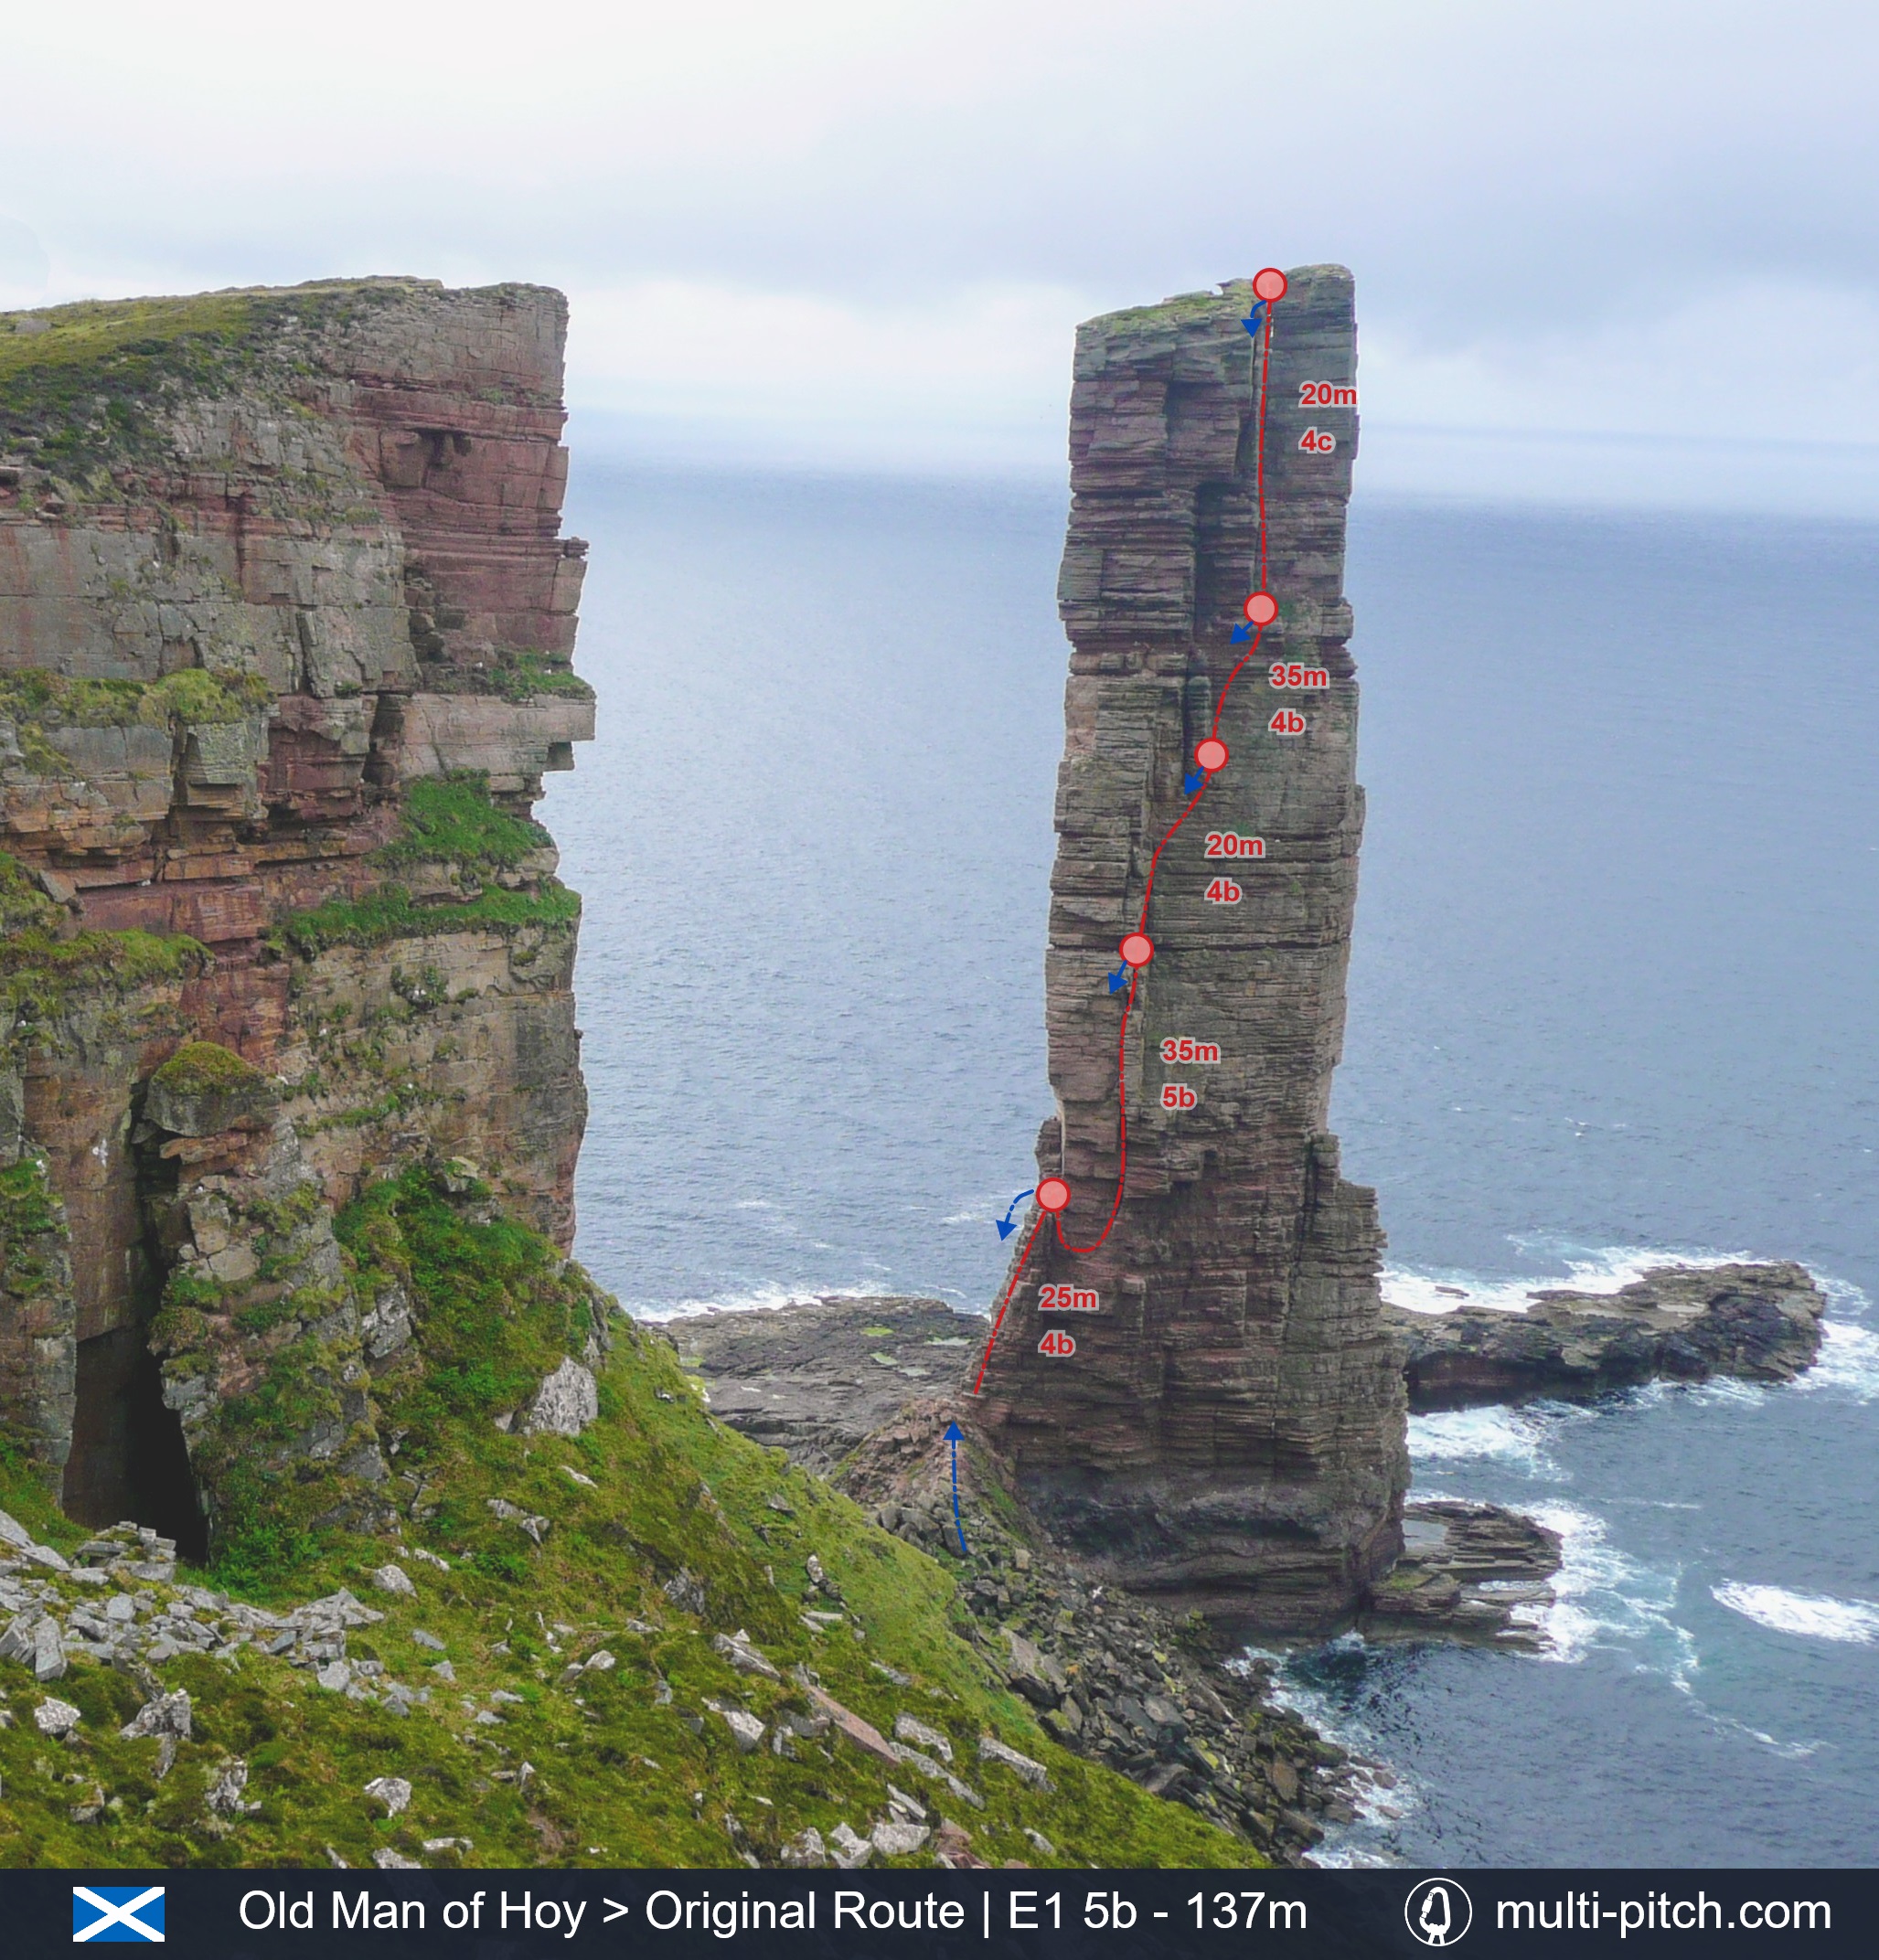 The Old Man of Hoy Rock Climbing Stack